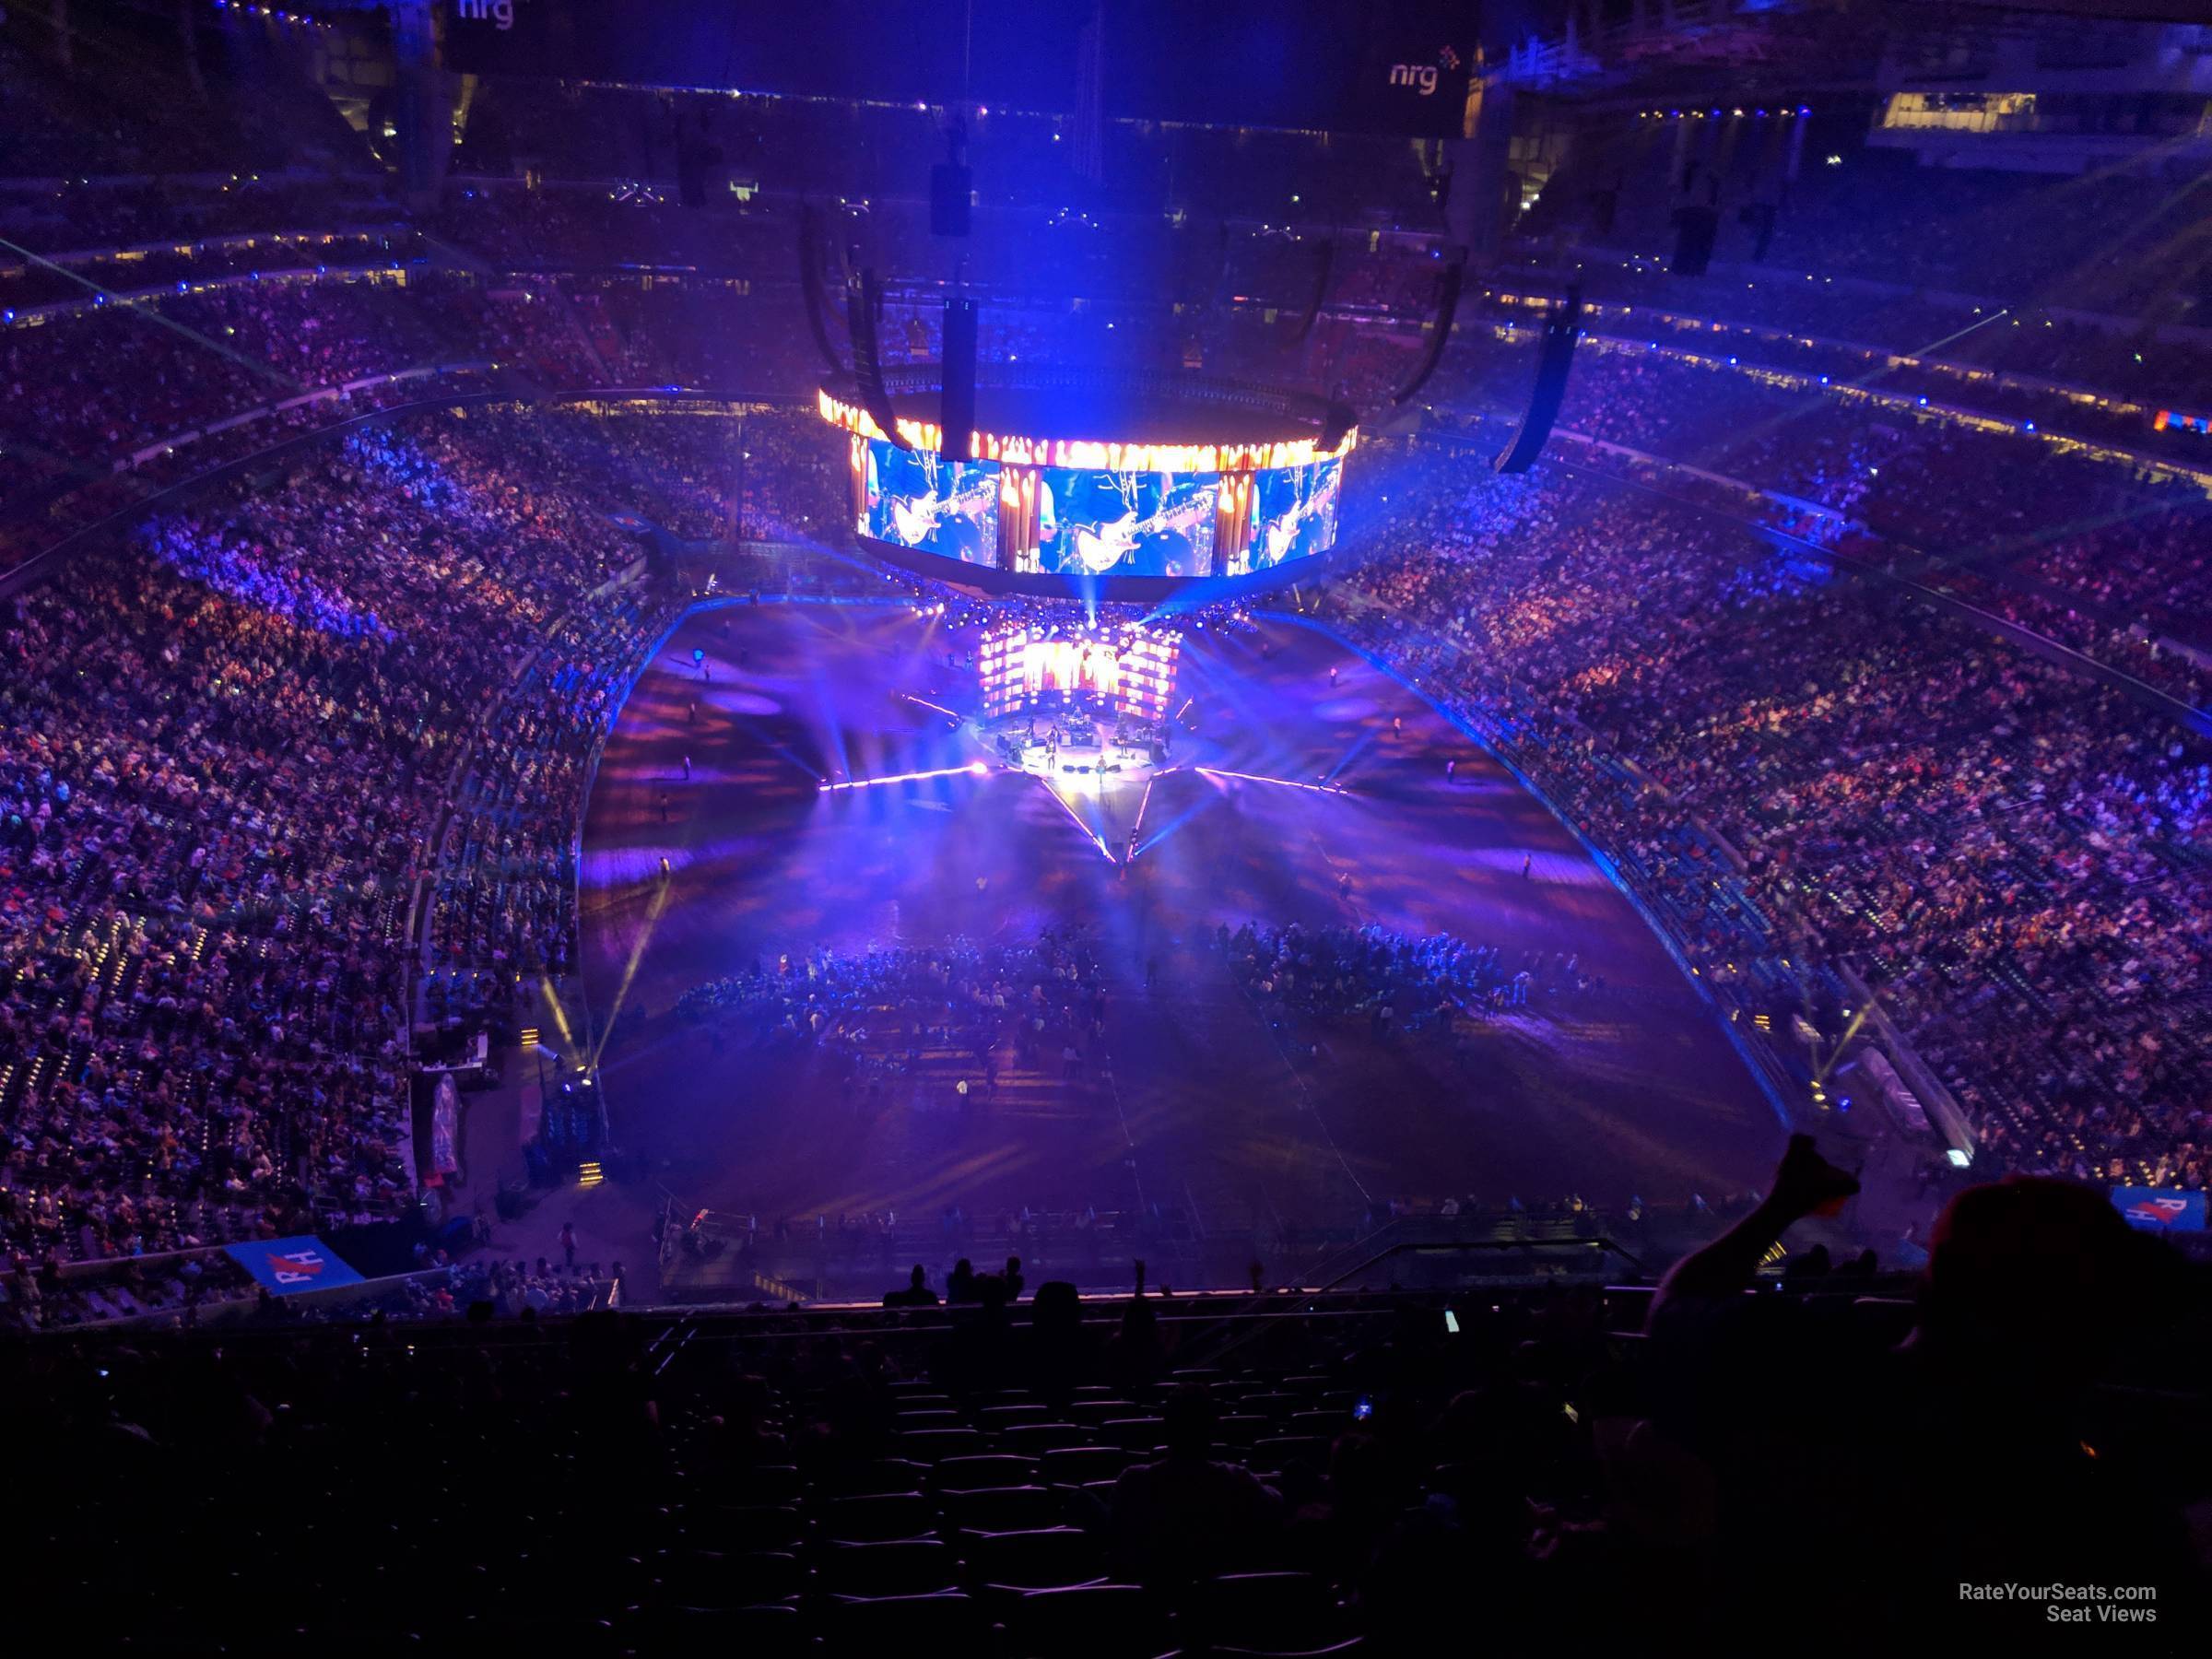 section 623, row m seat view  for concert - nrg stadium